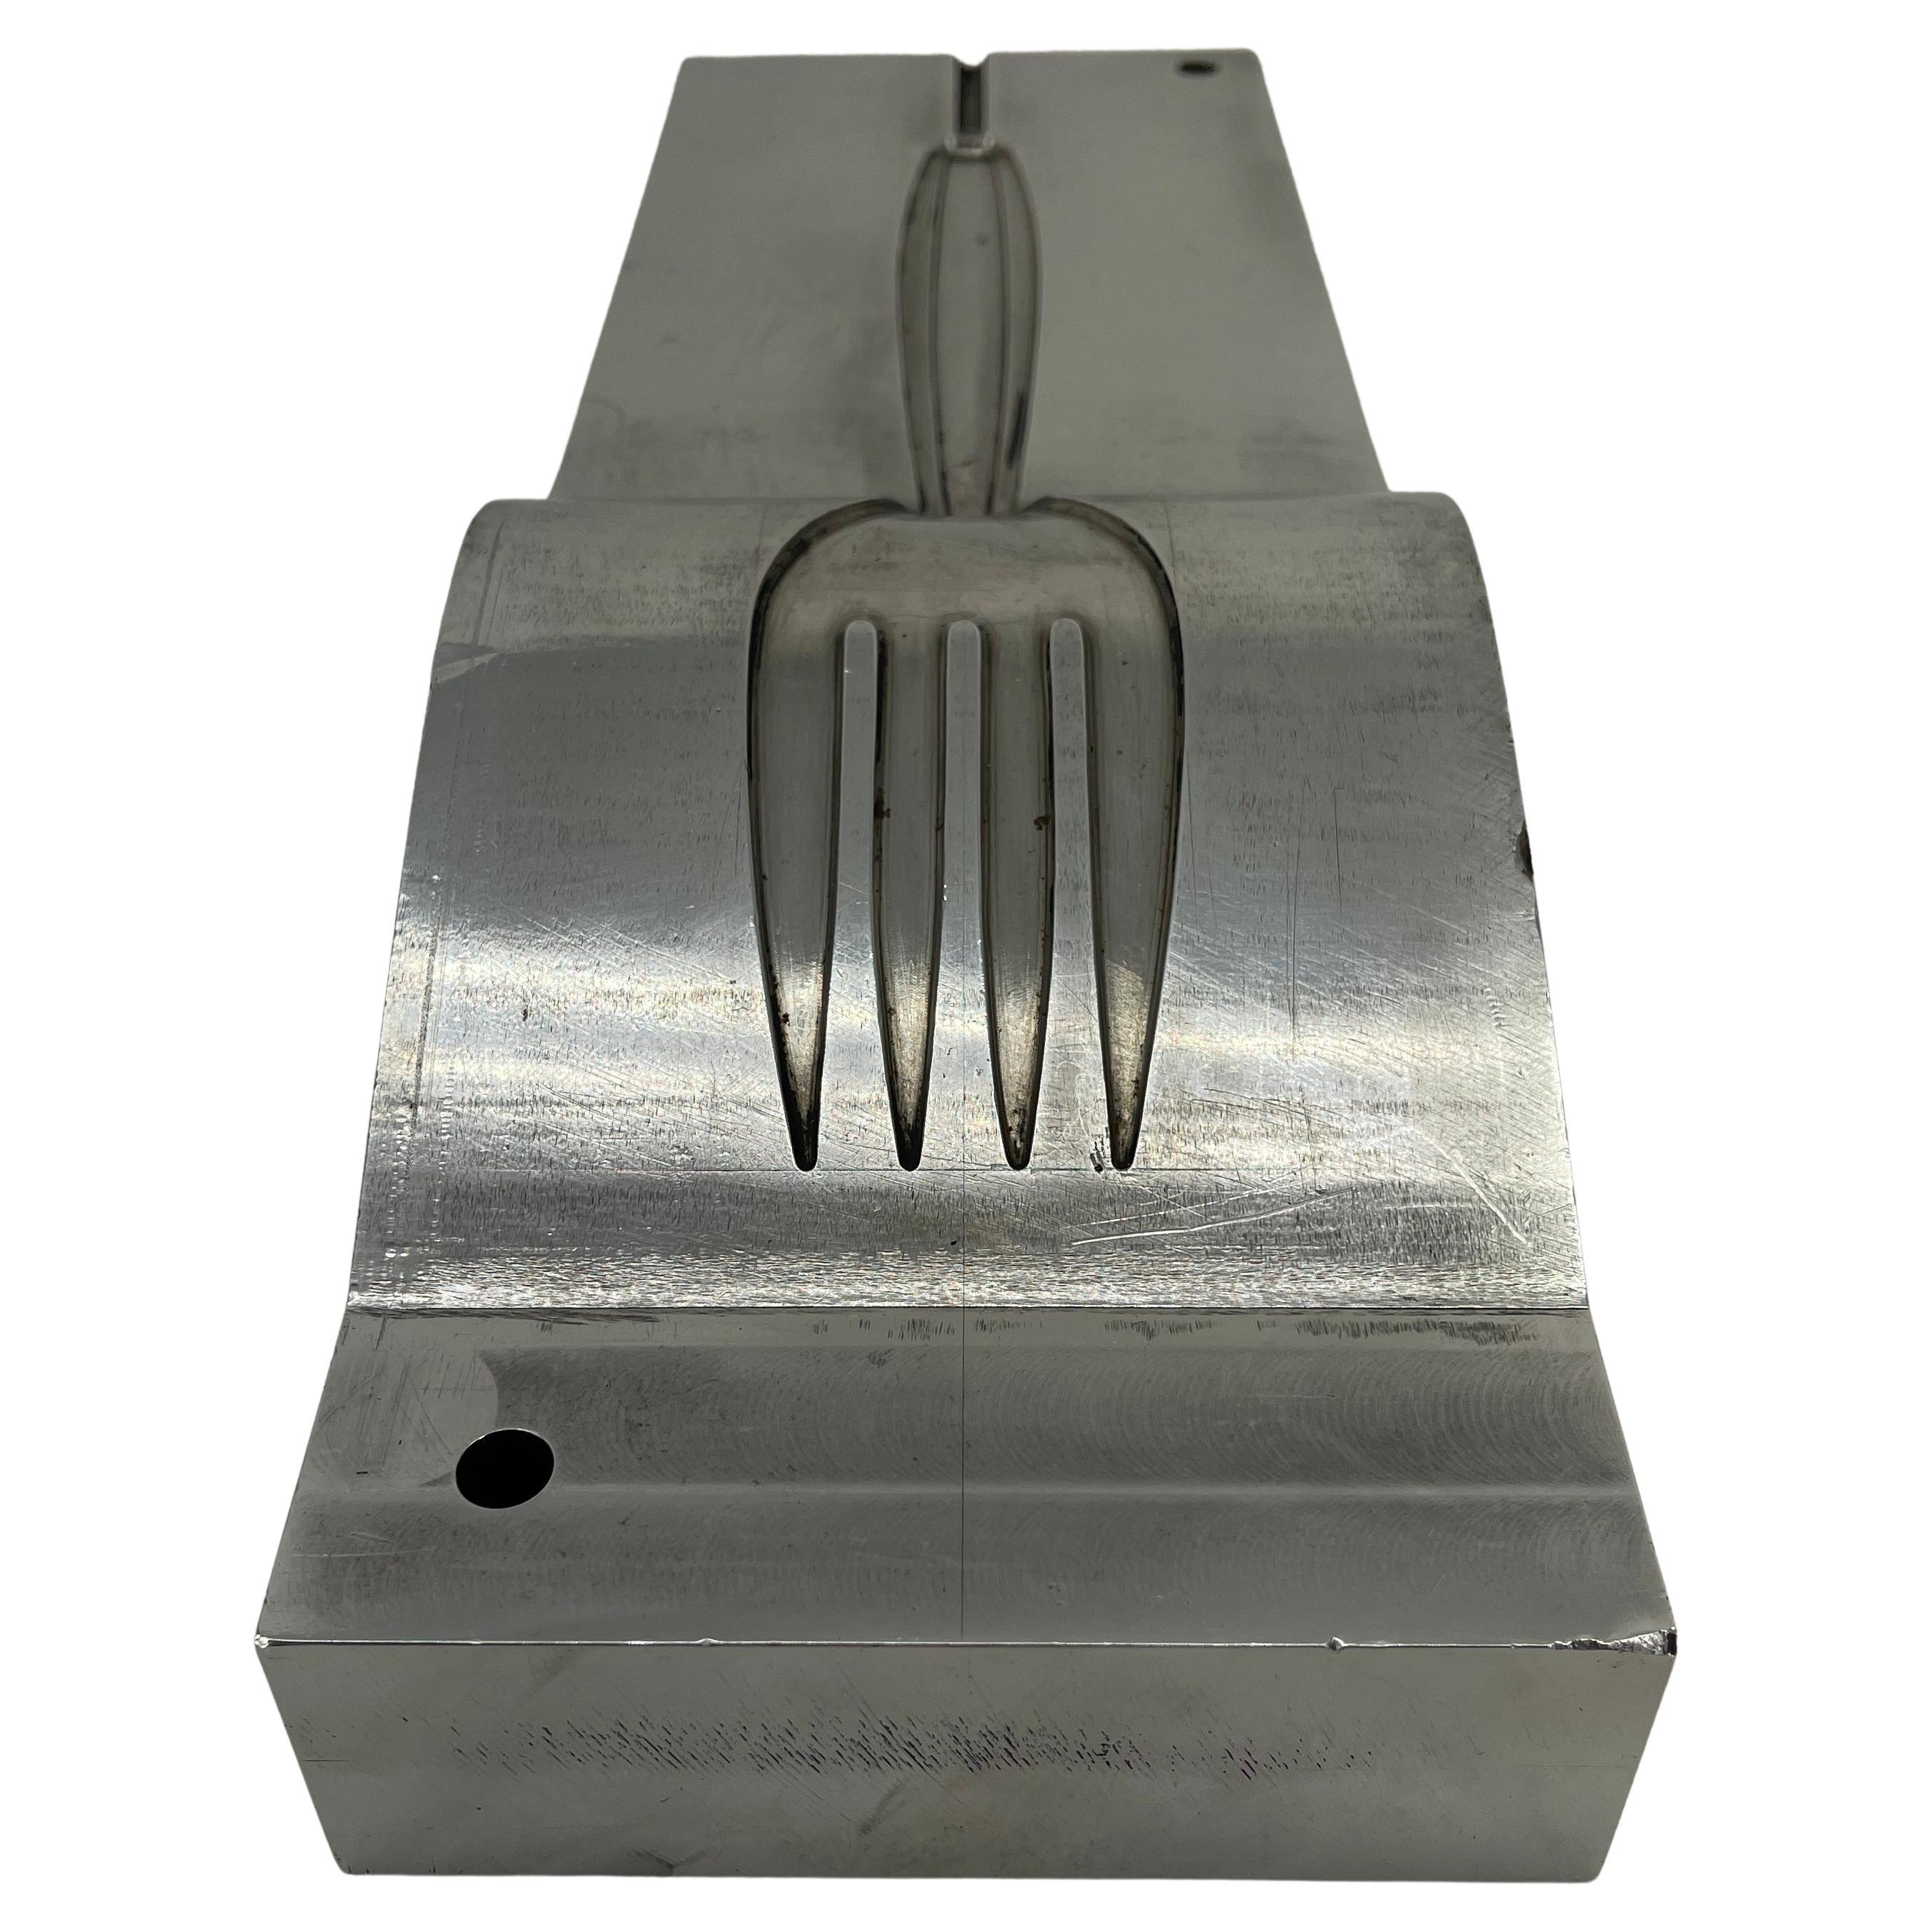 Machine-Made Large Stainless Steel Industrial Fork Mold Sculpture for Silverware For Sale